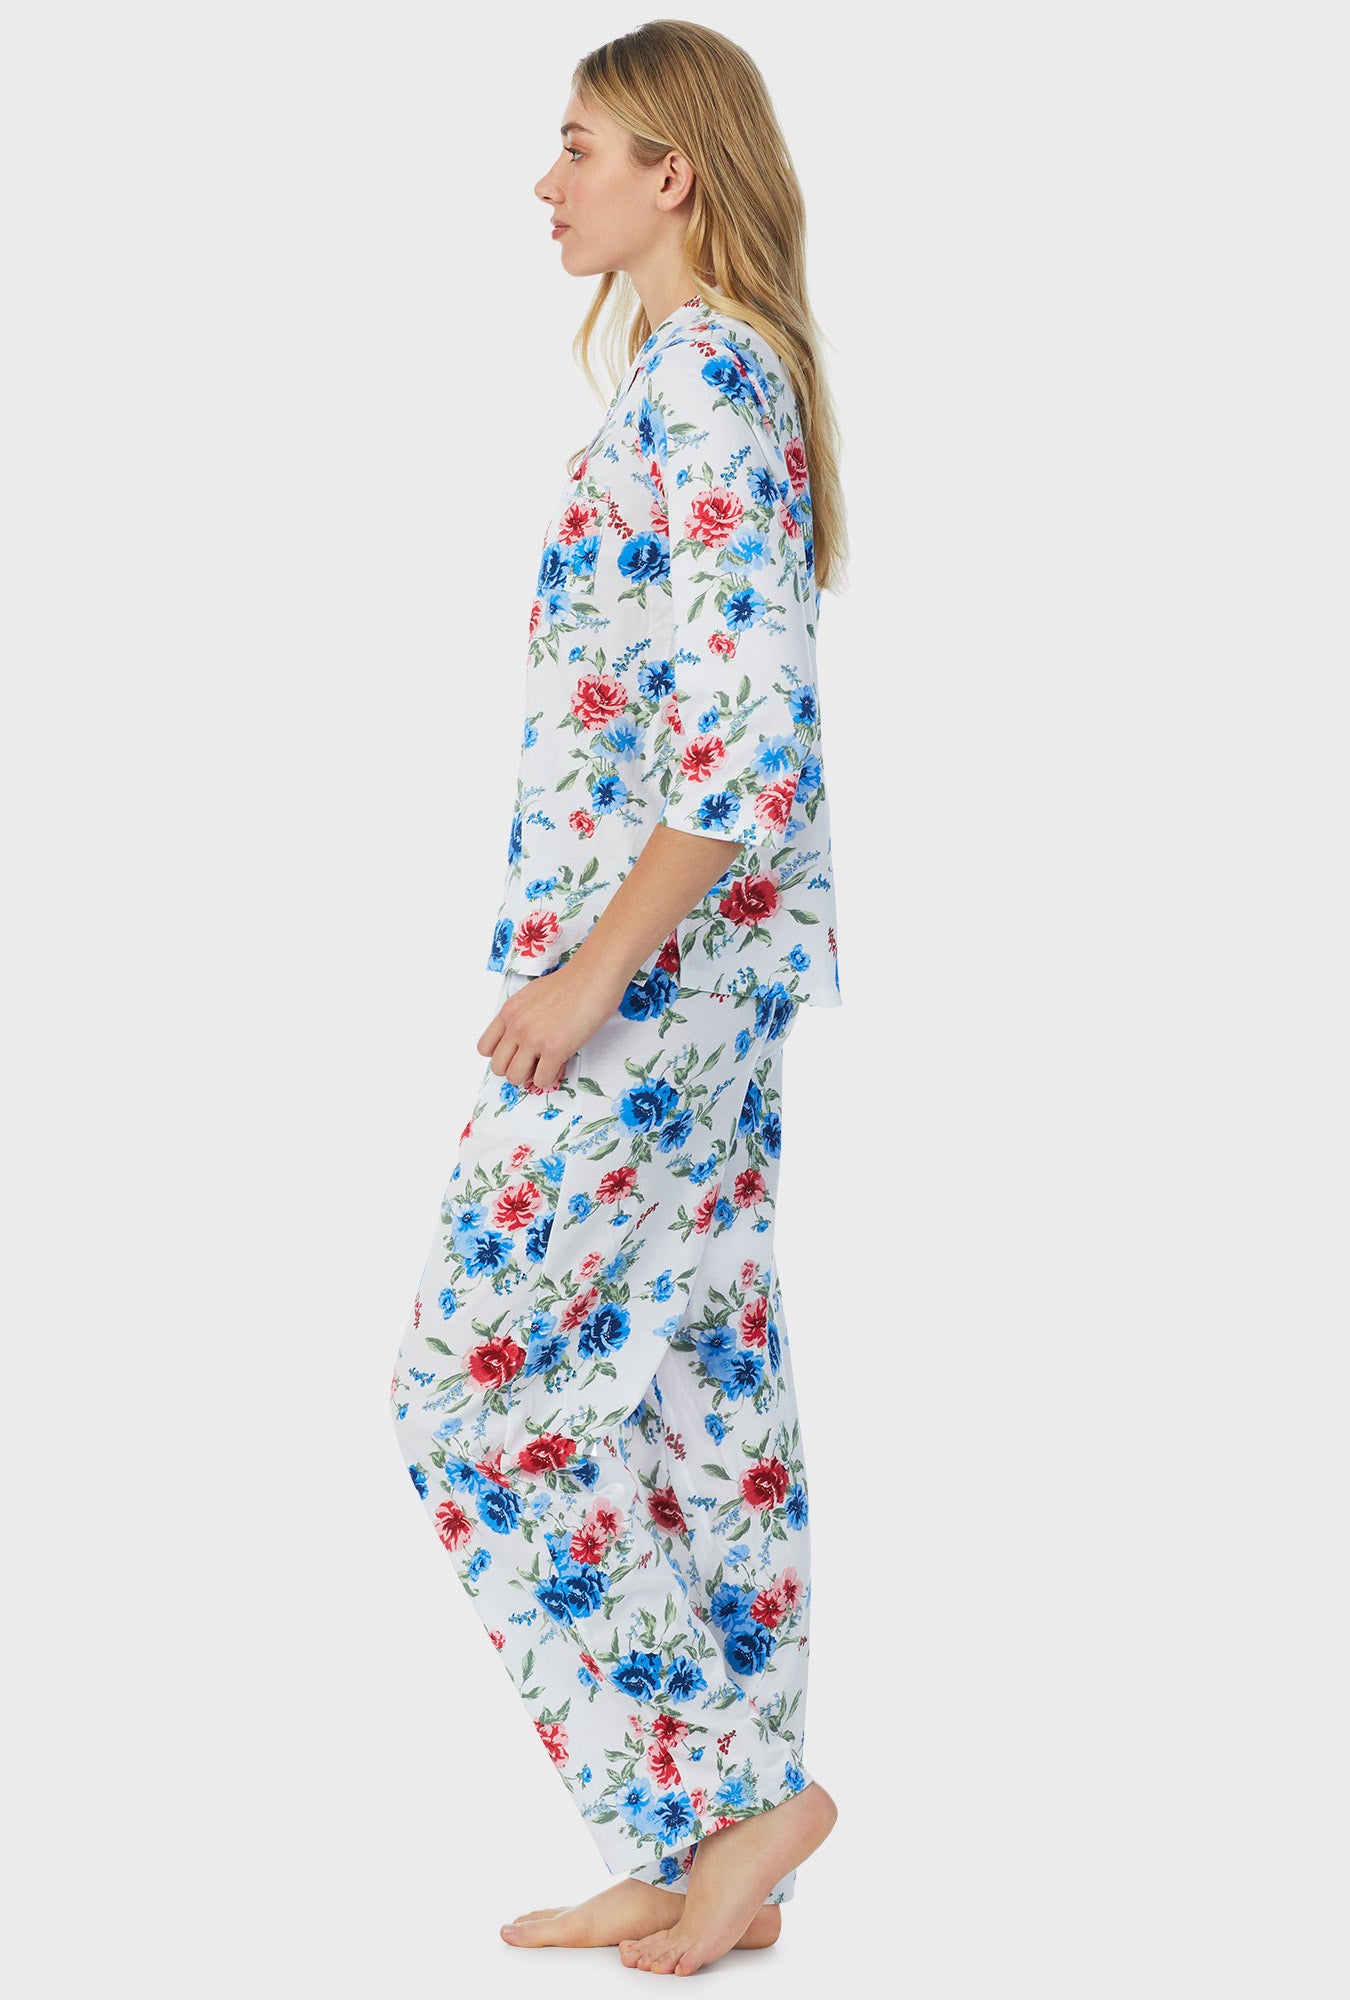 A lady wearing white quarter sleeve long pajama set with icy floral print.